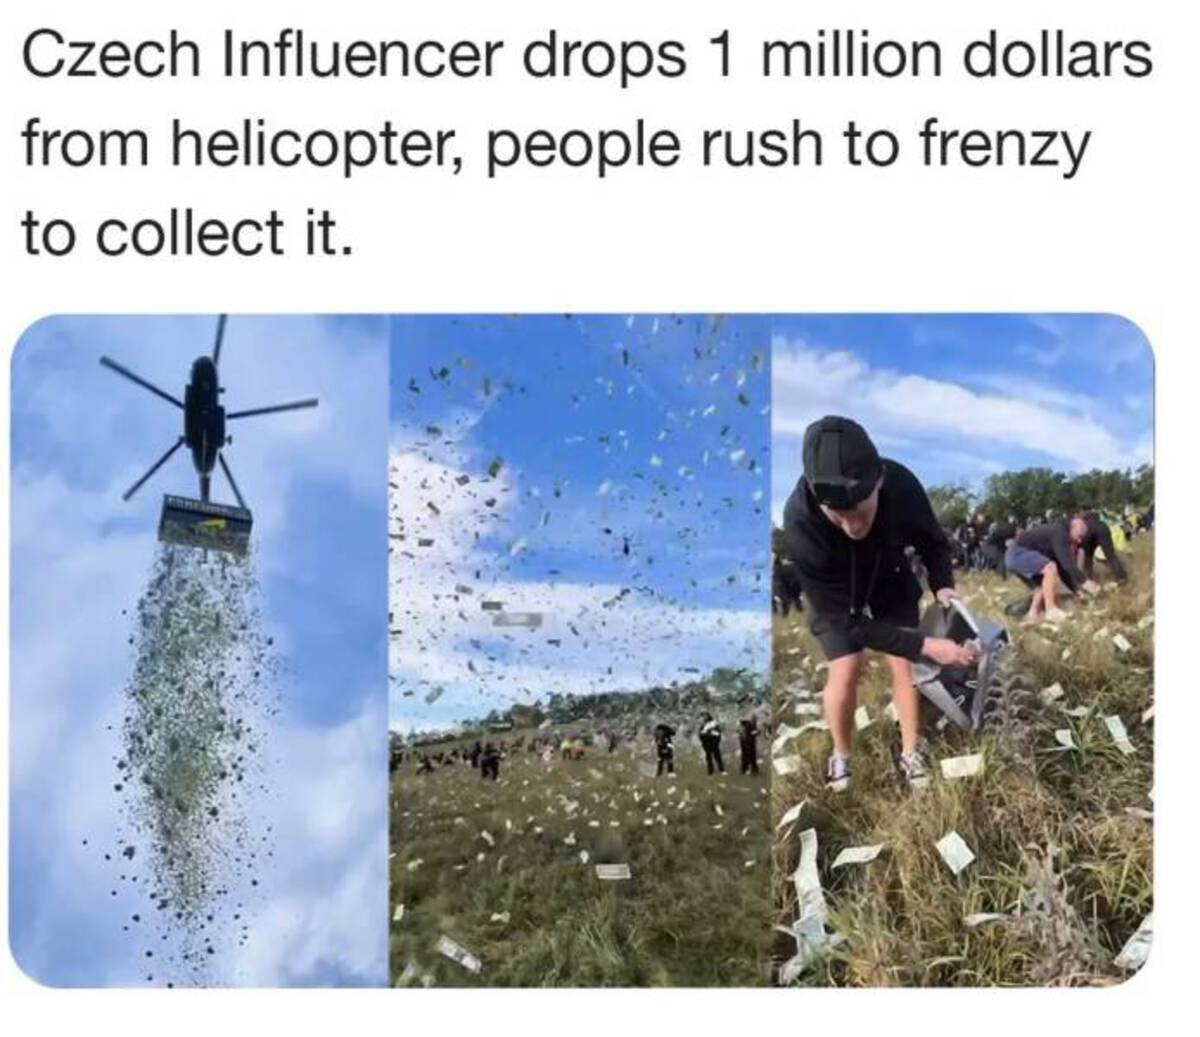 kazma money rain - Czech Influencer drops 1 million dollars from helicopter, people rush to frenzy to collect it.